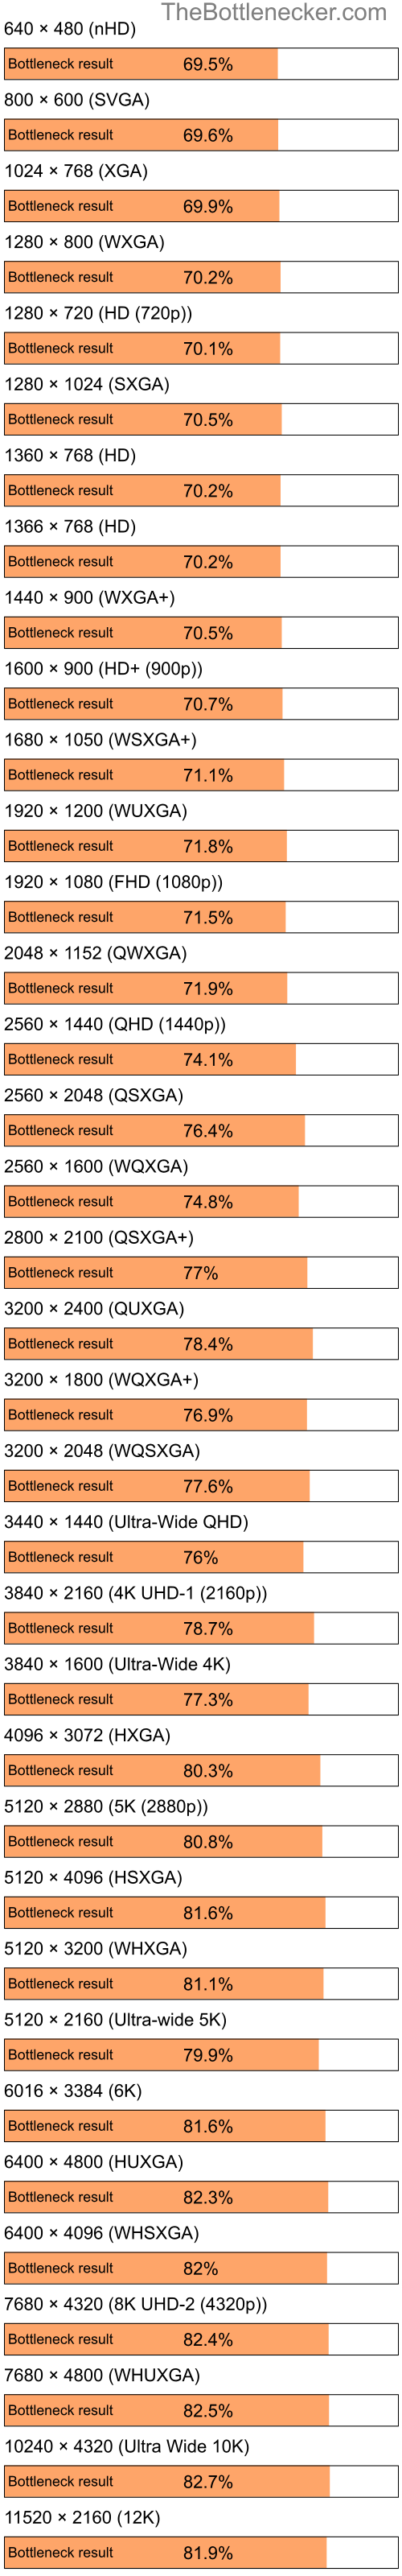 Bottleneck results by resolution for Intel Pentium 4 and AMD Radeon X800 PRO in General Tasks